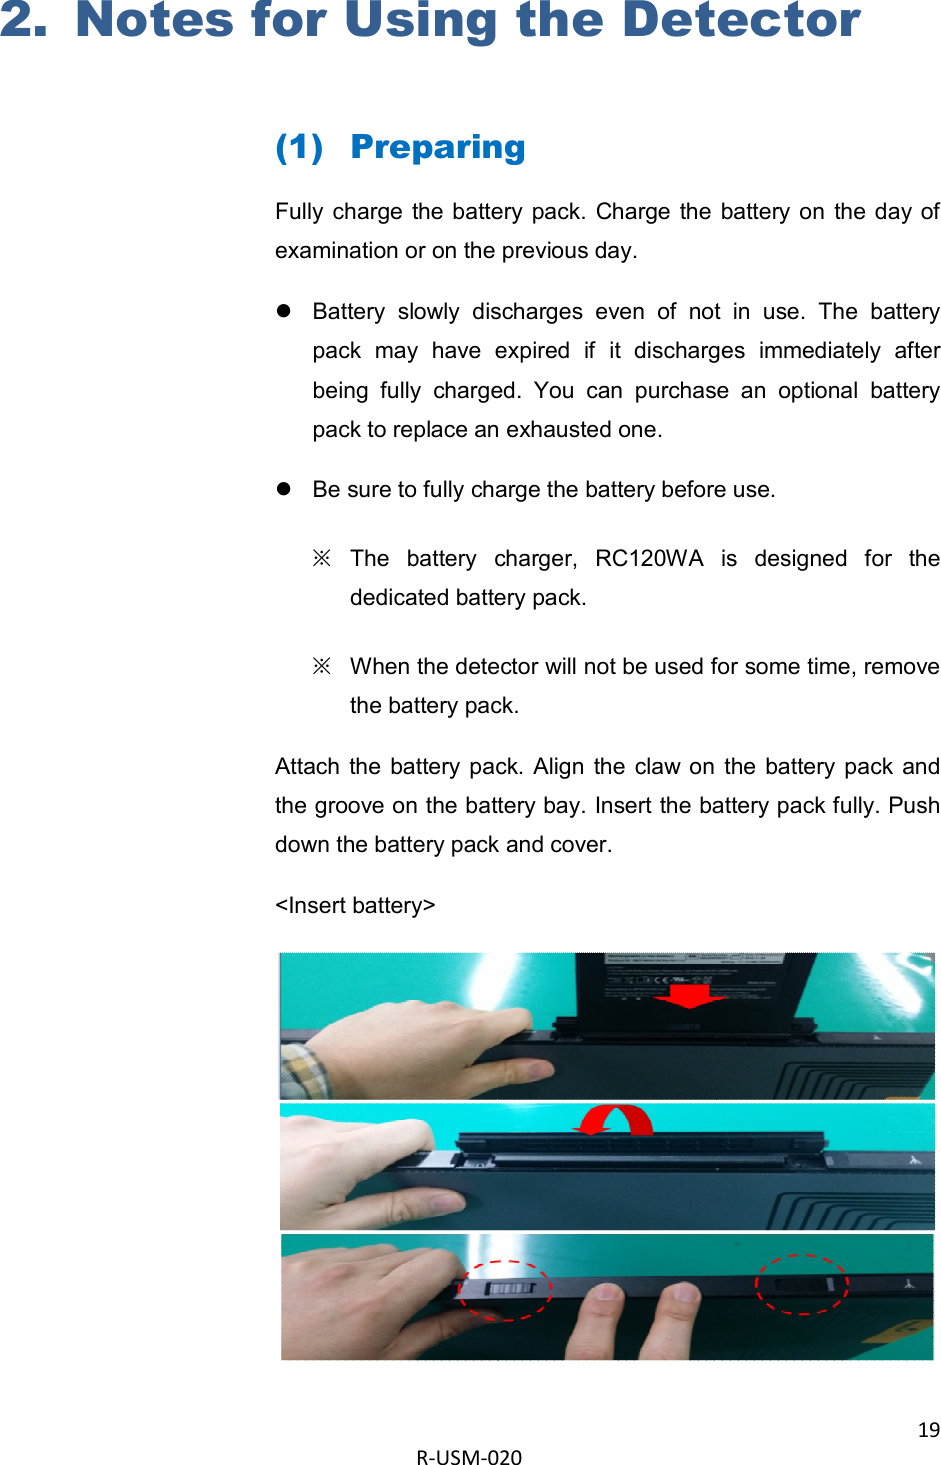 19  R-USM-020      2. Notes for Using the Detector  (1) Preparing Fully charge  the battery  pack.  Charge  the  battery on  the day of examination or on the previous day.   Battery  slowly  discharges  even  of  not  in  use.  The  battery pack  may  have  expired  if  it  discharges  immediately  after being  fully  charged.  You  can  purchase  an  optional  battery pack to replace an exhausted one.   Be sure to fully charge the battery before use. ※ The  battery  charger,  RC120WA  is  designed  for  the dedicated battery pack. ※ When the detector will not be used for some time, remove the battery pack. Attach  the  battery pack. Align  the  claw on  the  battery pack  and the groove on the battery bay. Insert the battery pack fully. Push down the battery pack and cover.  &lt;Insert battery&gt;  